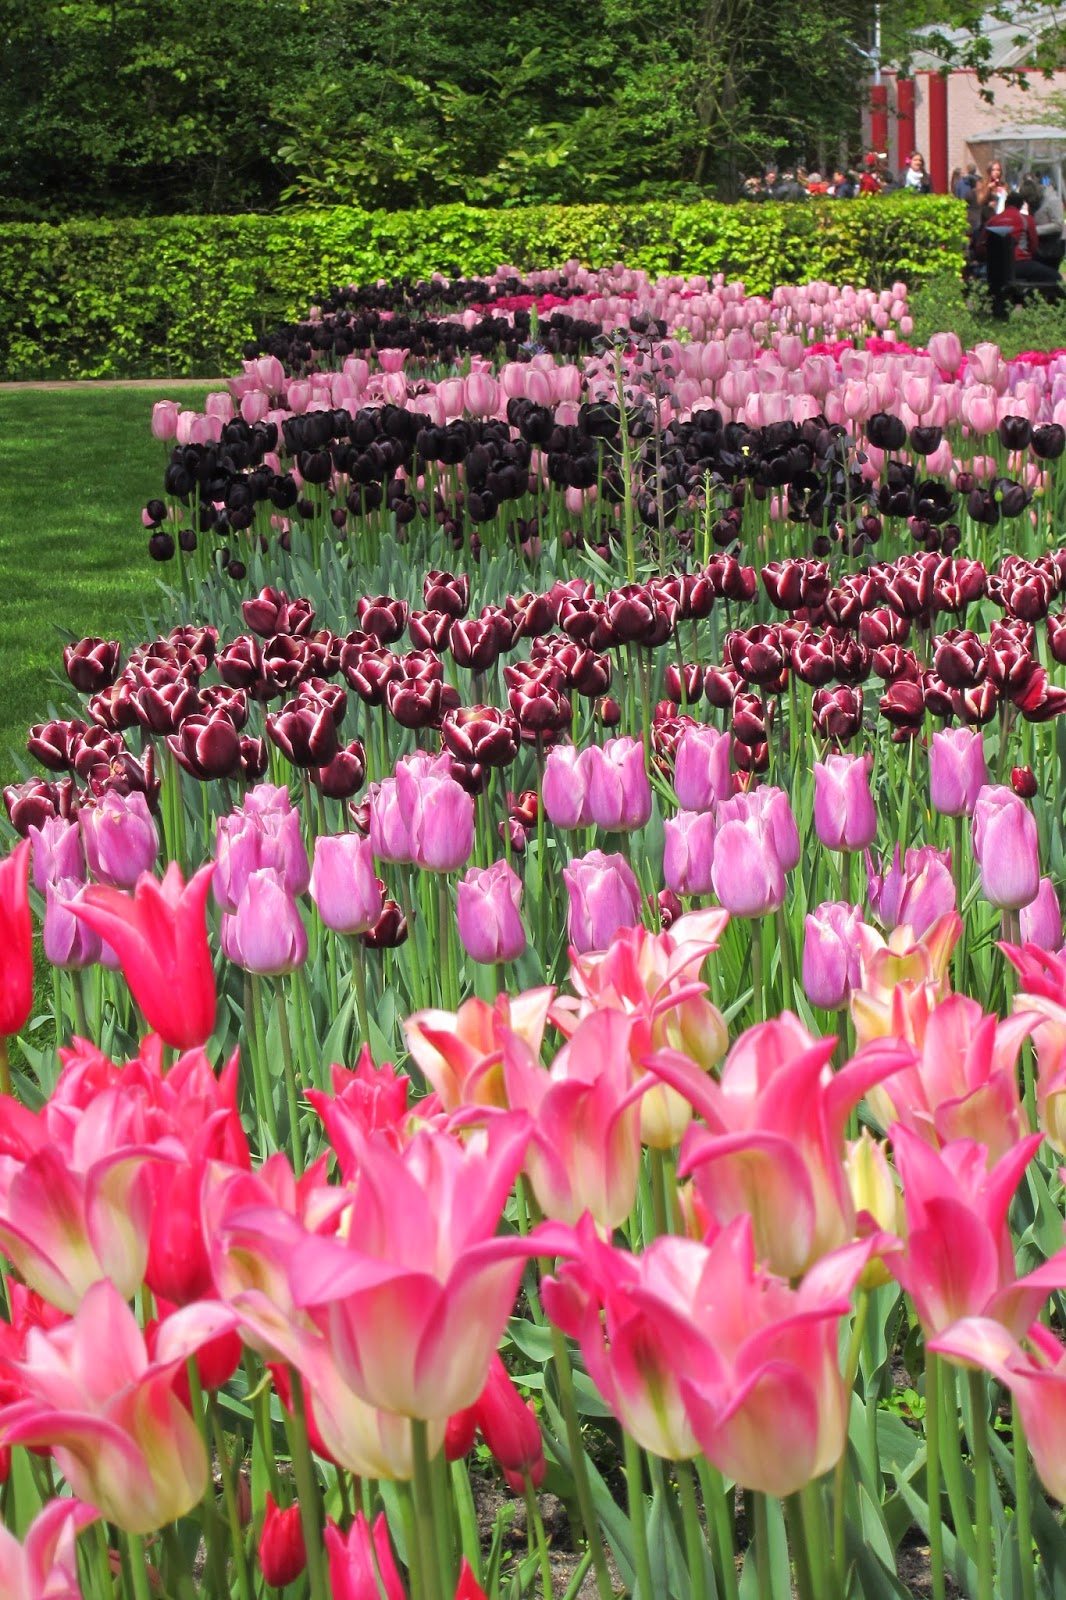 Five Things Friday: A Movie, A Book, Some Tulips, and an Impending Event or Two . . .